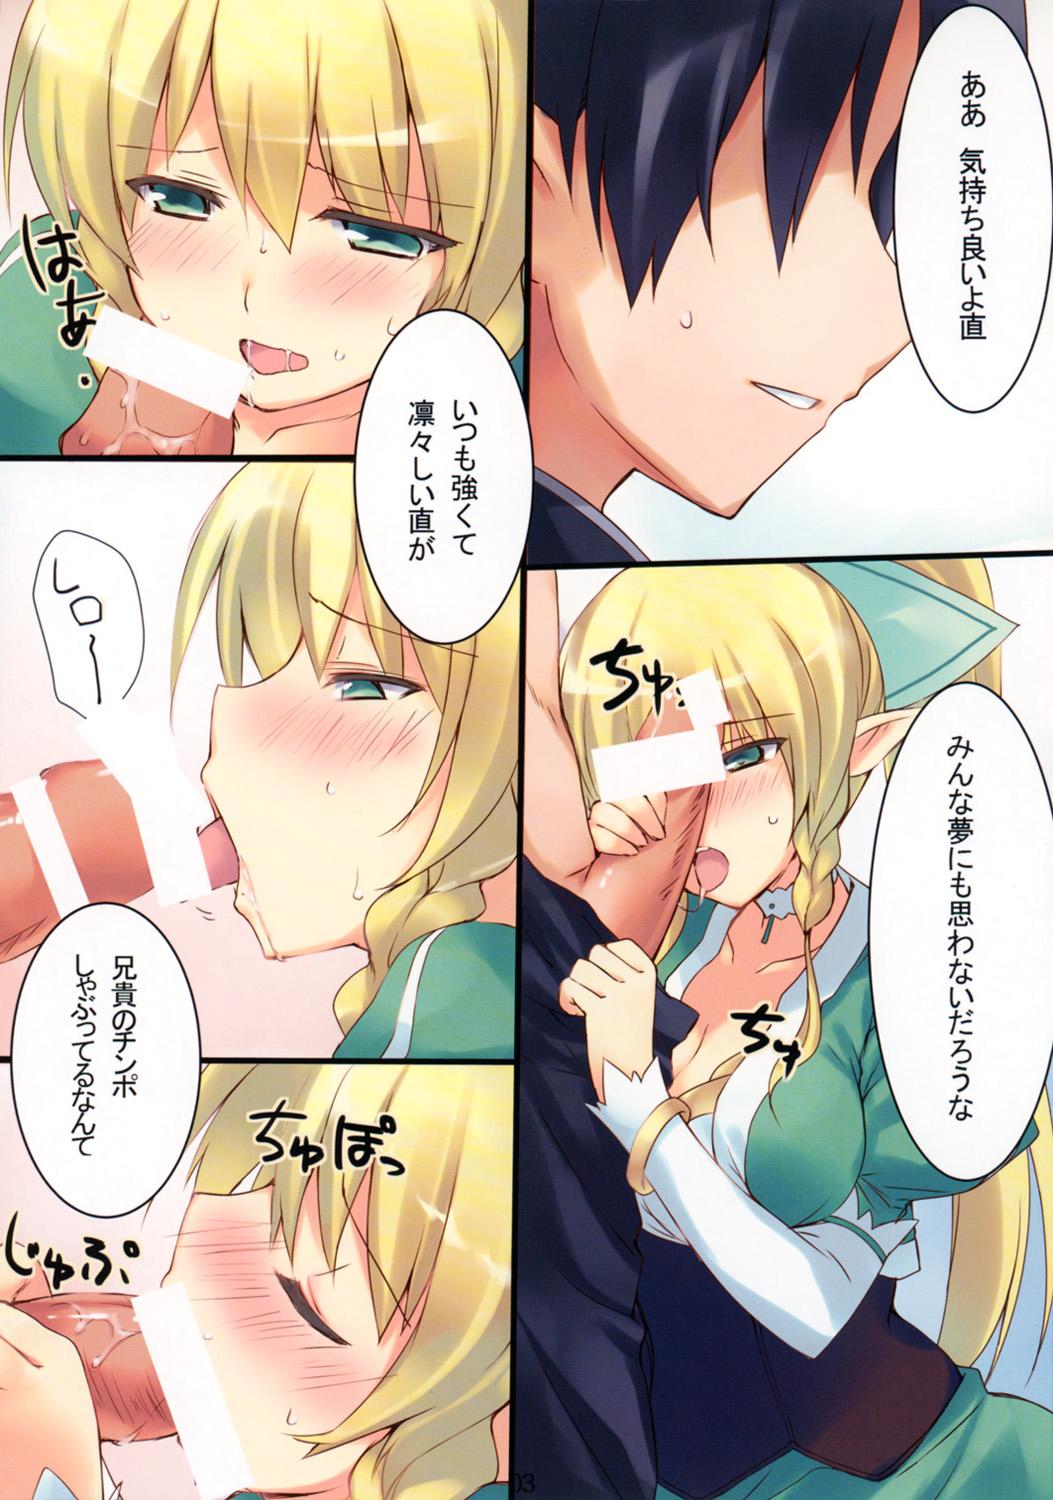 Foursome Fairy SEED - Sword art online Trap - Page 3